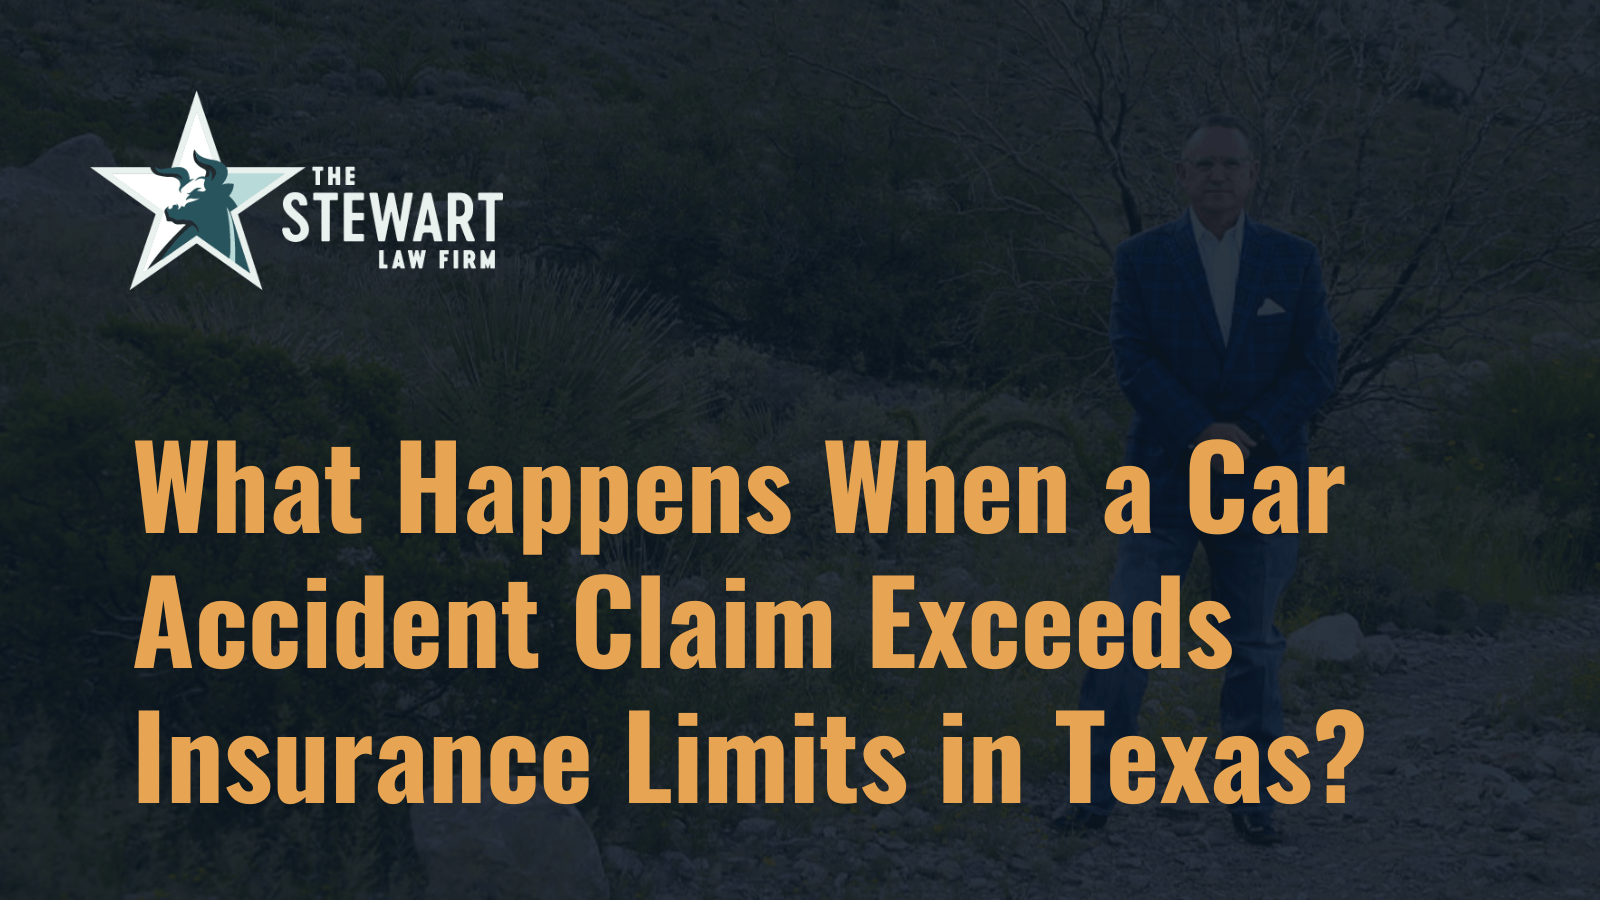 What Happens When a Car Accident Claim Exceeds Insurance Limits in Texas?